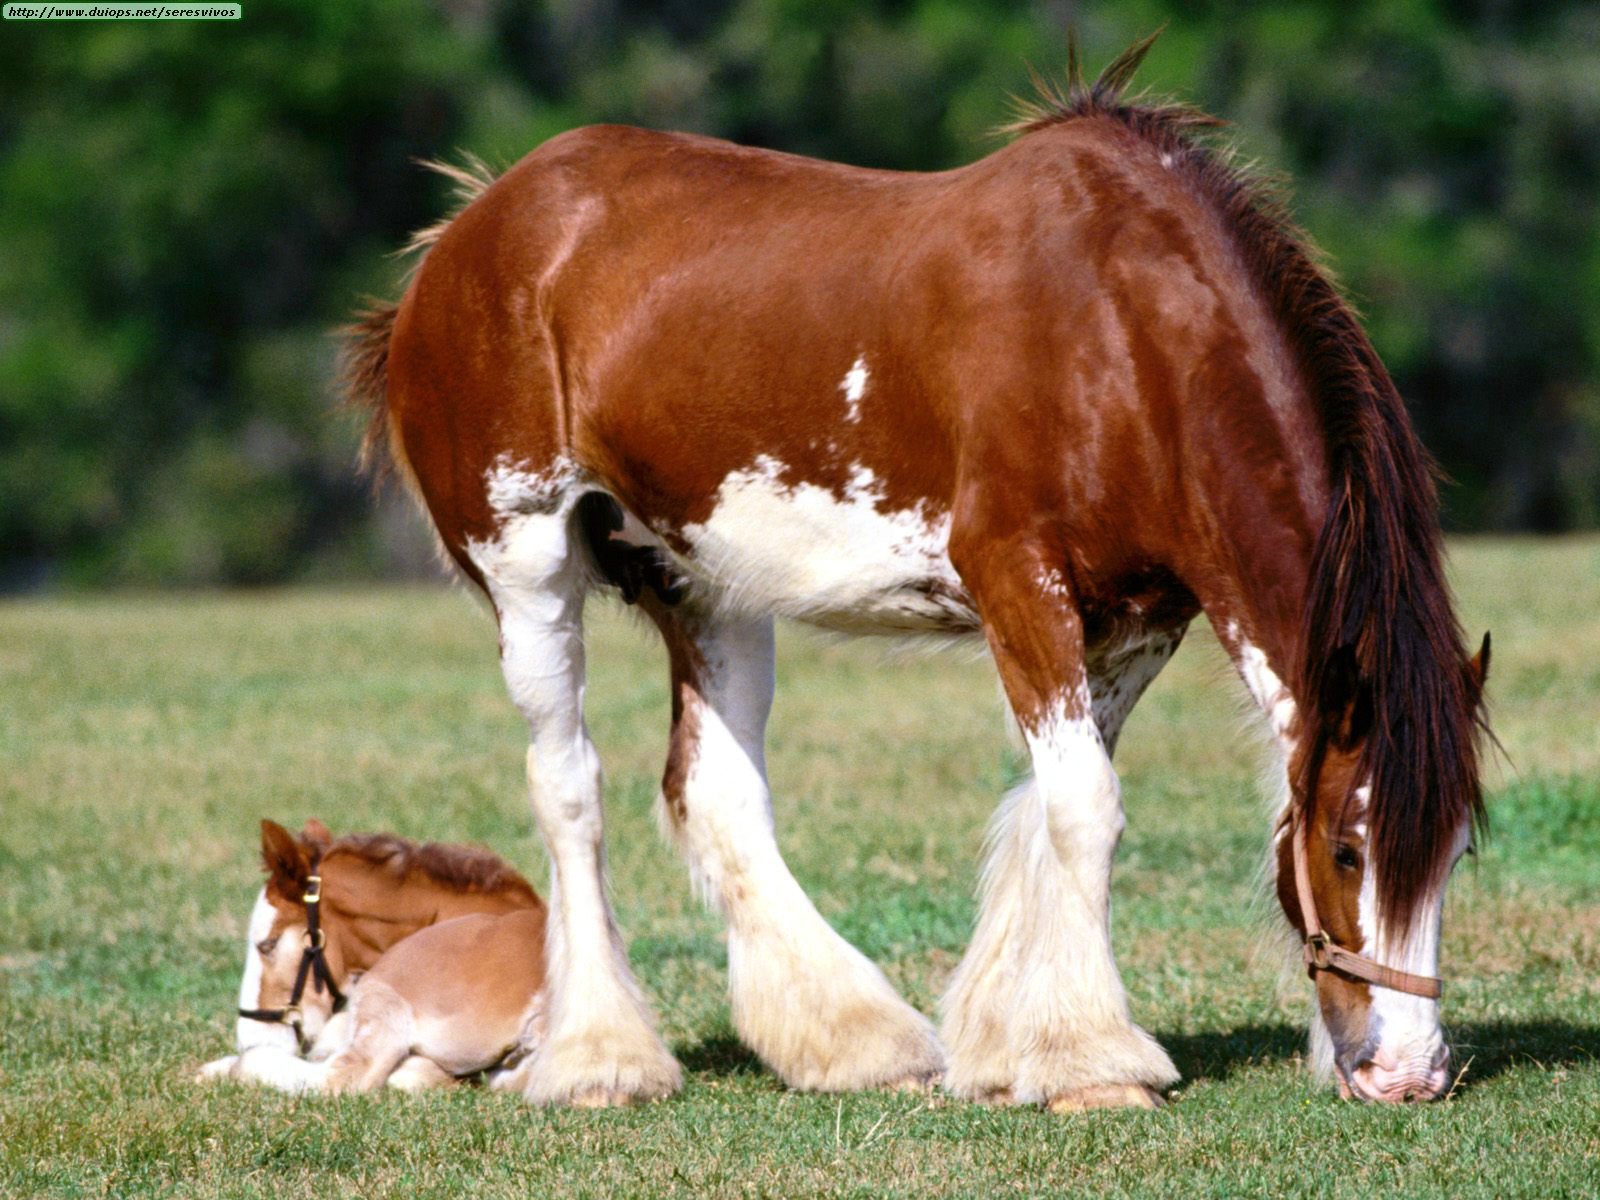 Animals%20Horses_Strength%20Personified,%20Clydesdale%20Mare%20and%20Foal.jpg